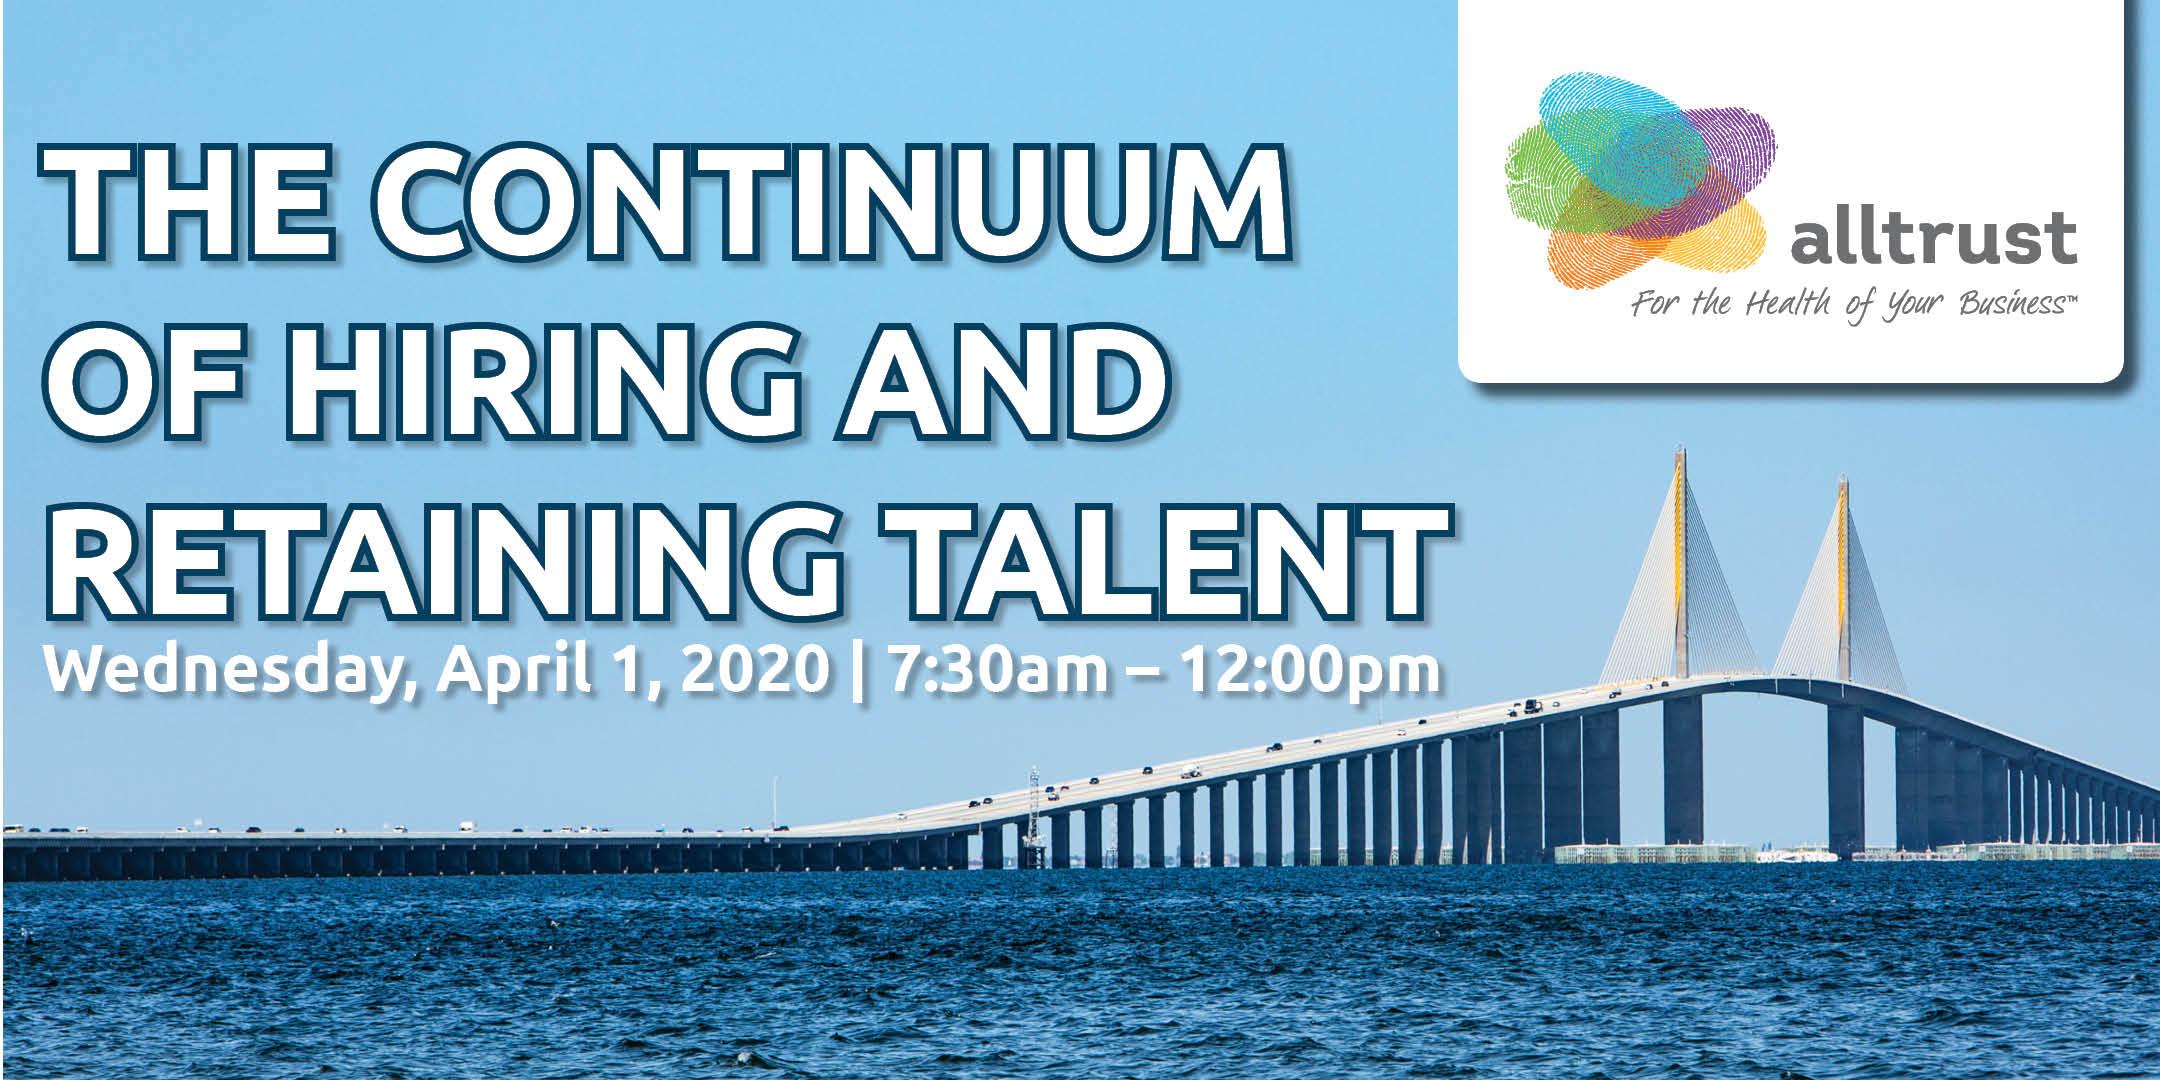 The Continuum Of Hiring And Retaining Talent